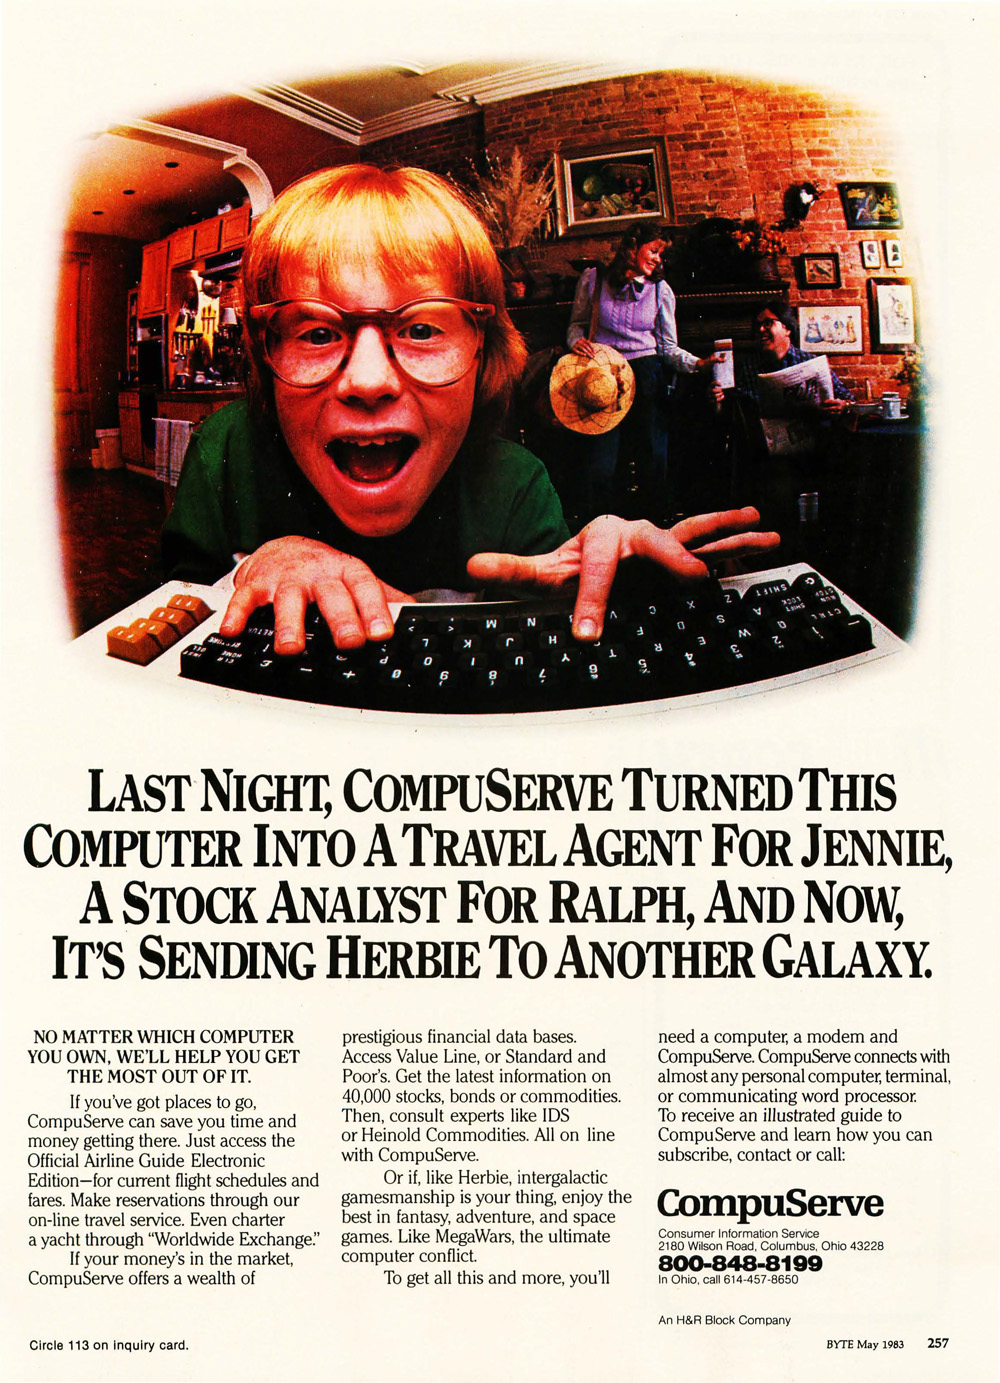 CompuServe ad, May 1983